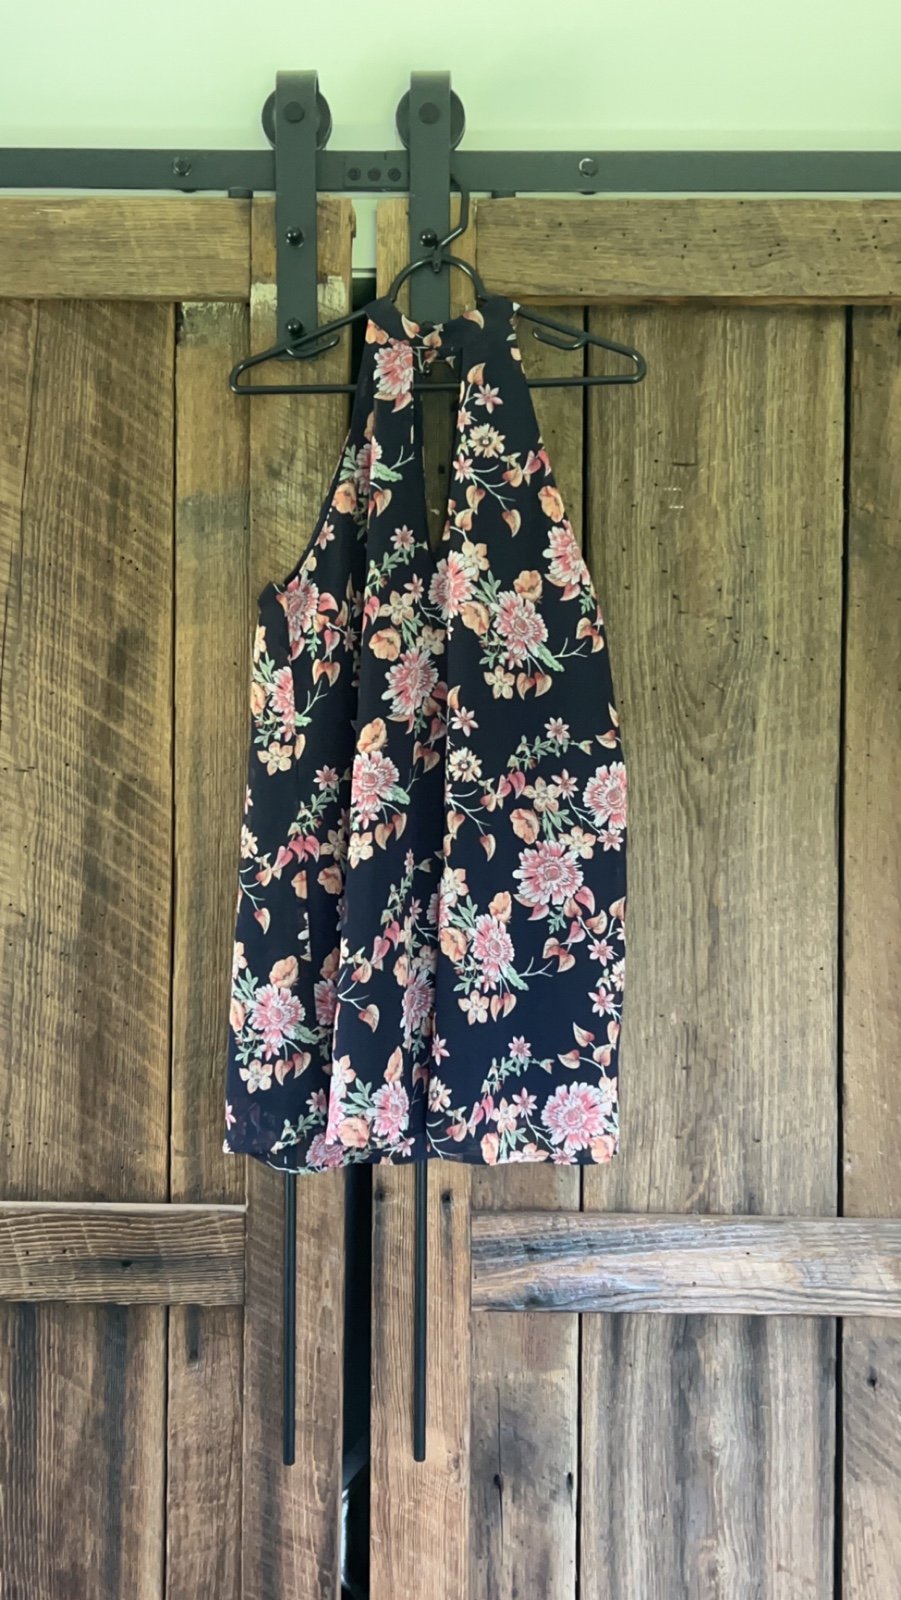 Cheap Forever 21 floral dress size small MhzWav4QE well